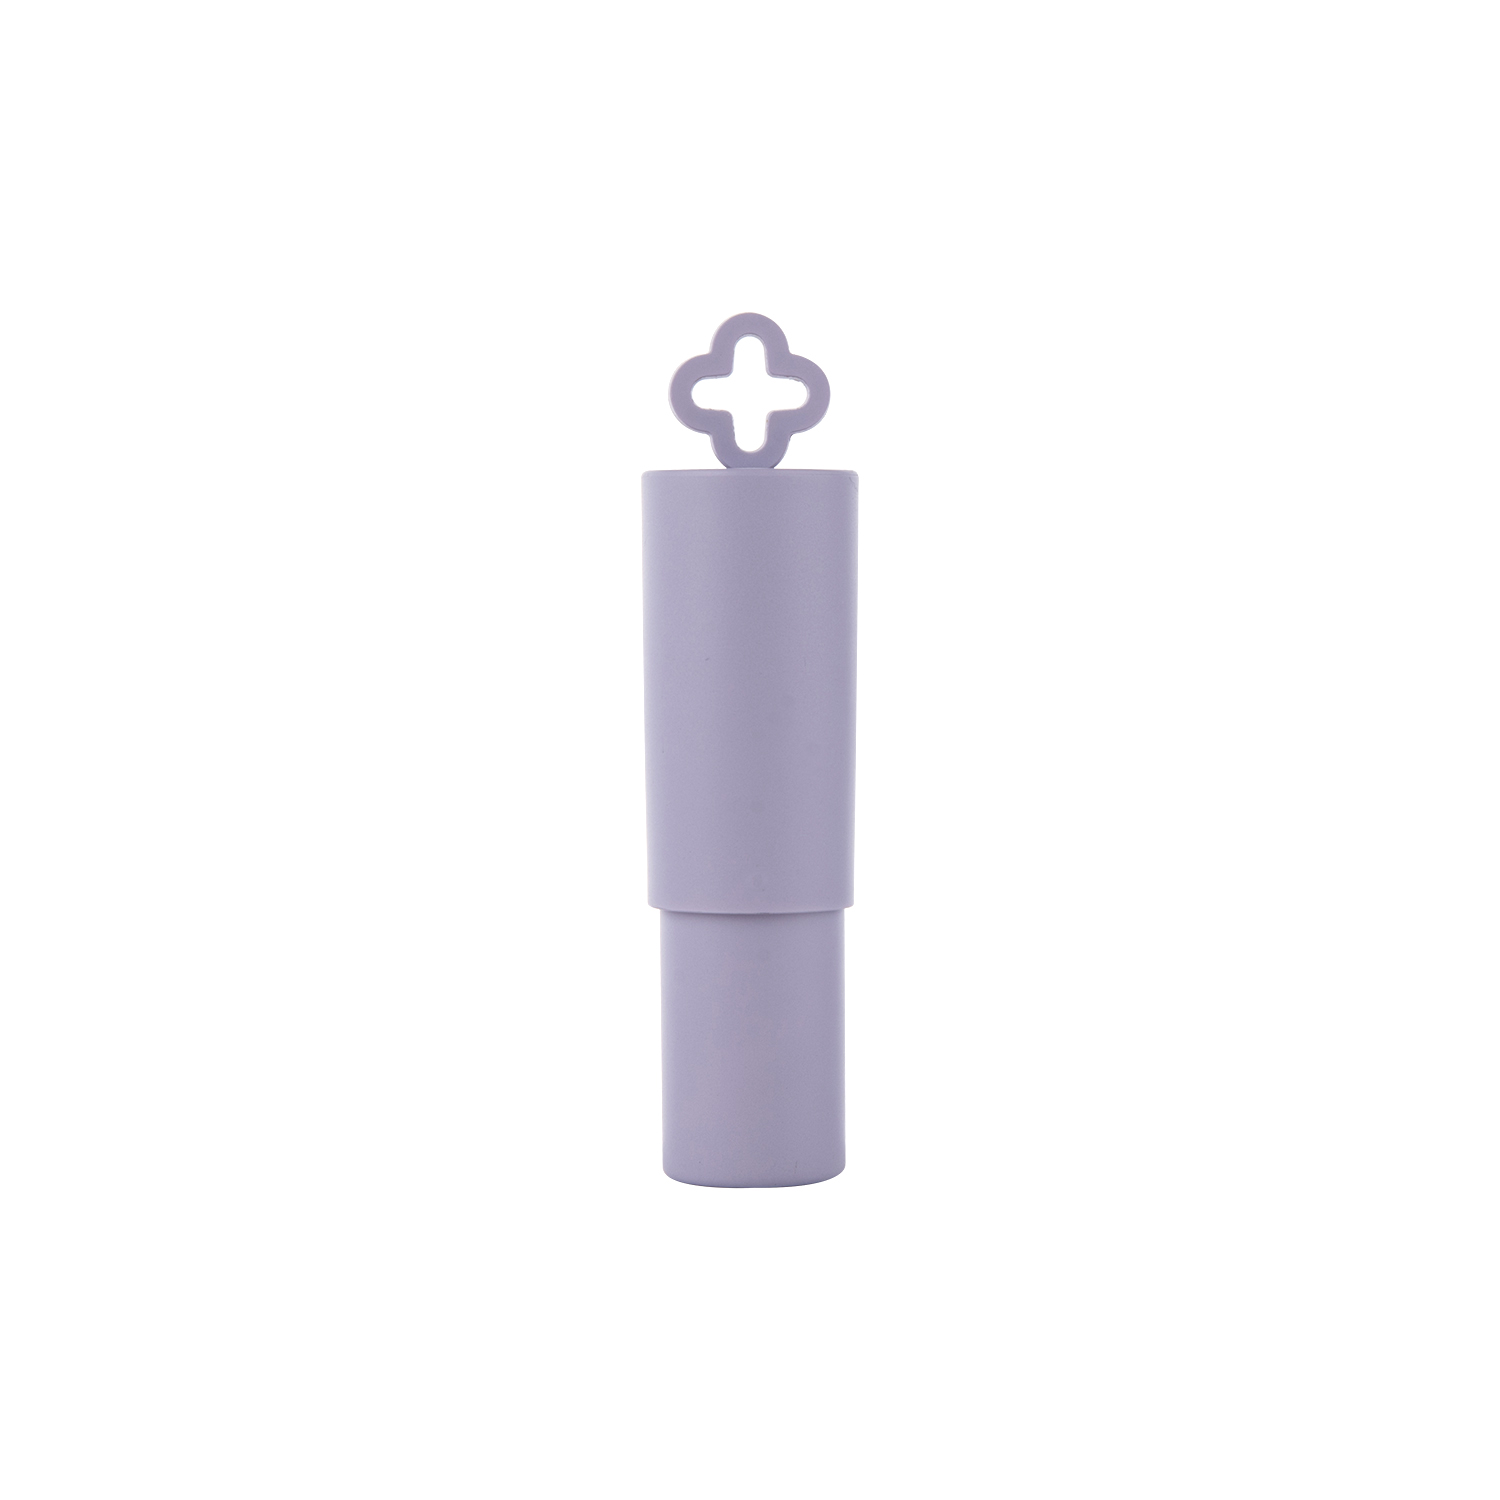 3.5g Purple empty lipstick tubes lip balm container cosmetic personal care tubes